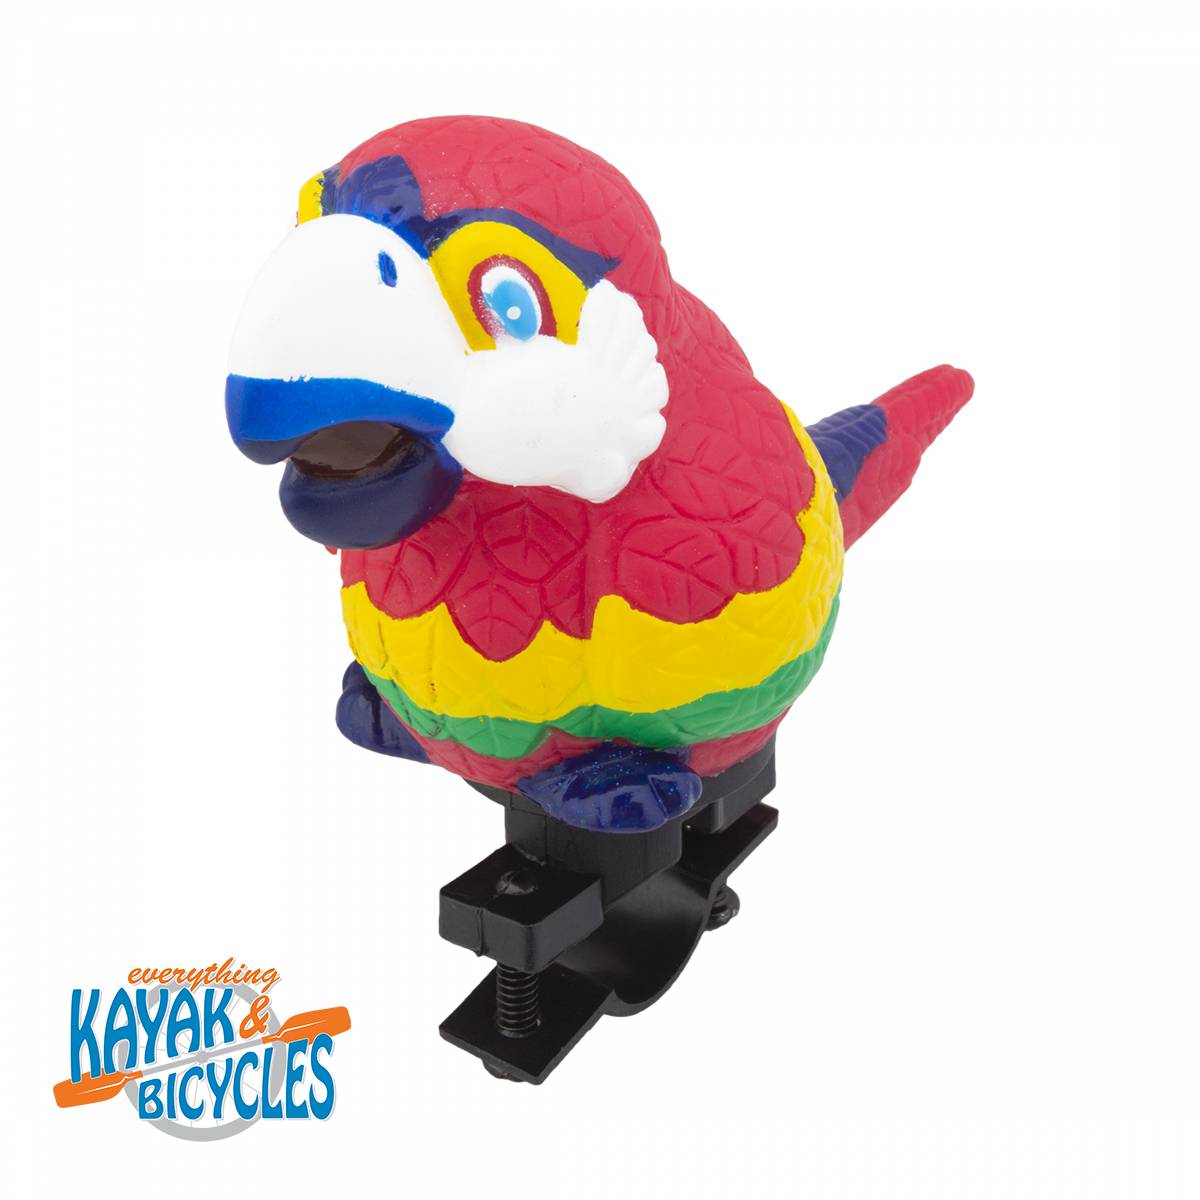 Parrot Bike Horn 
Novelty horns that are great for kids and adults alike
Perfect for novice riders as well as serious riders who like a little flair, personality, or humor for their group rides
Fits most handlebars